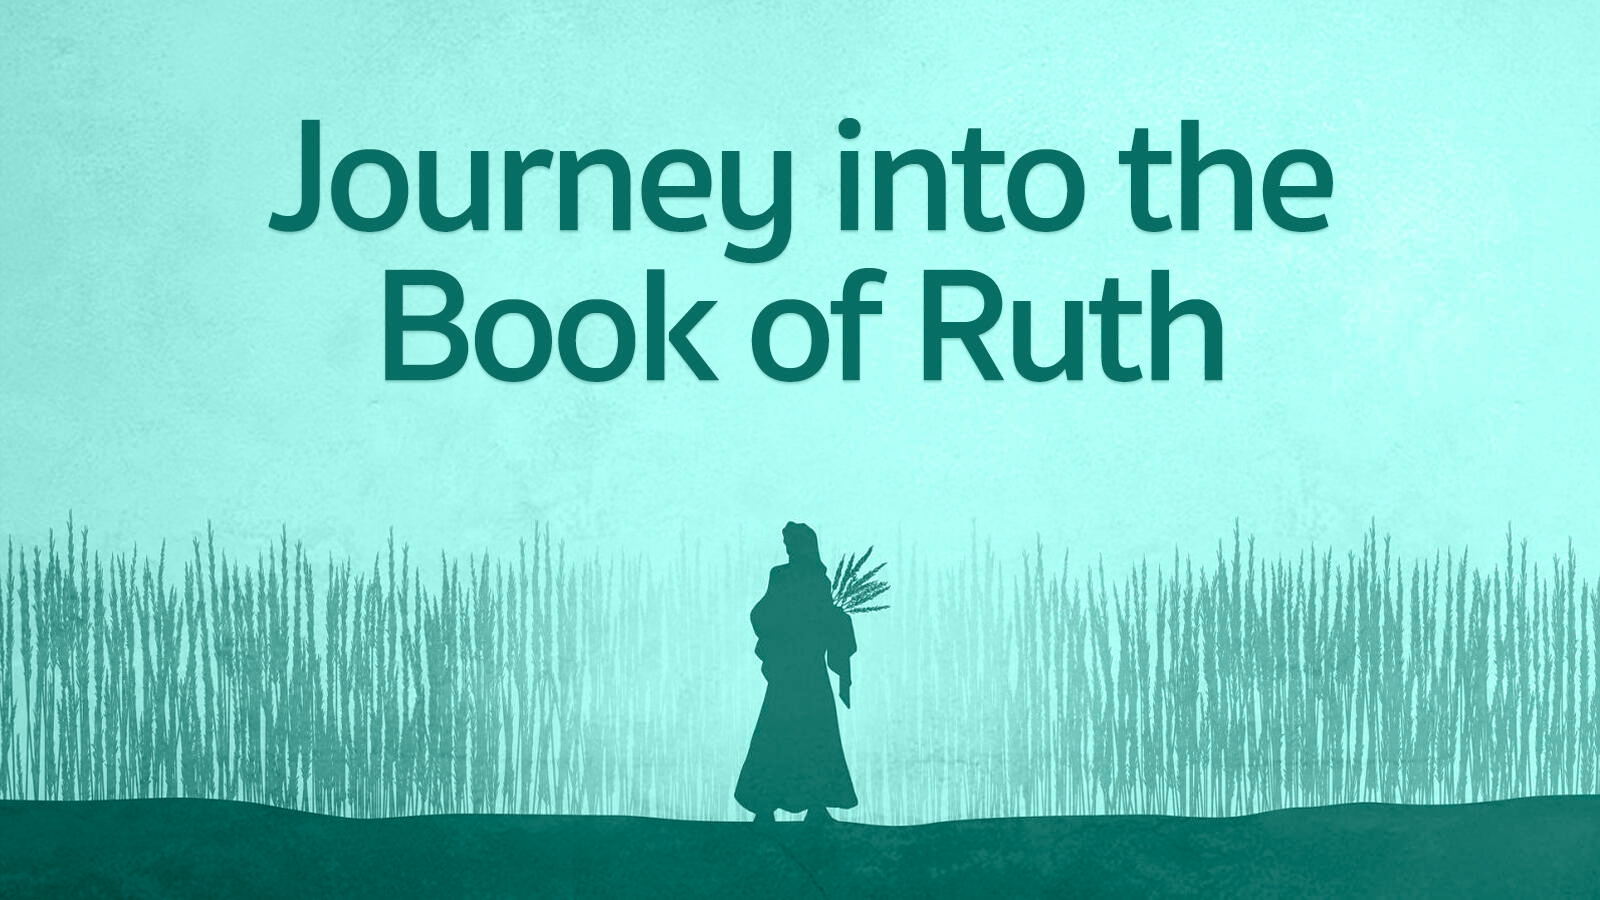 Journey into the Book of Ruth